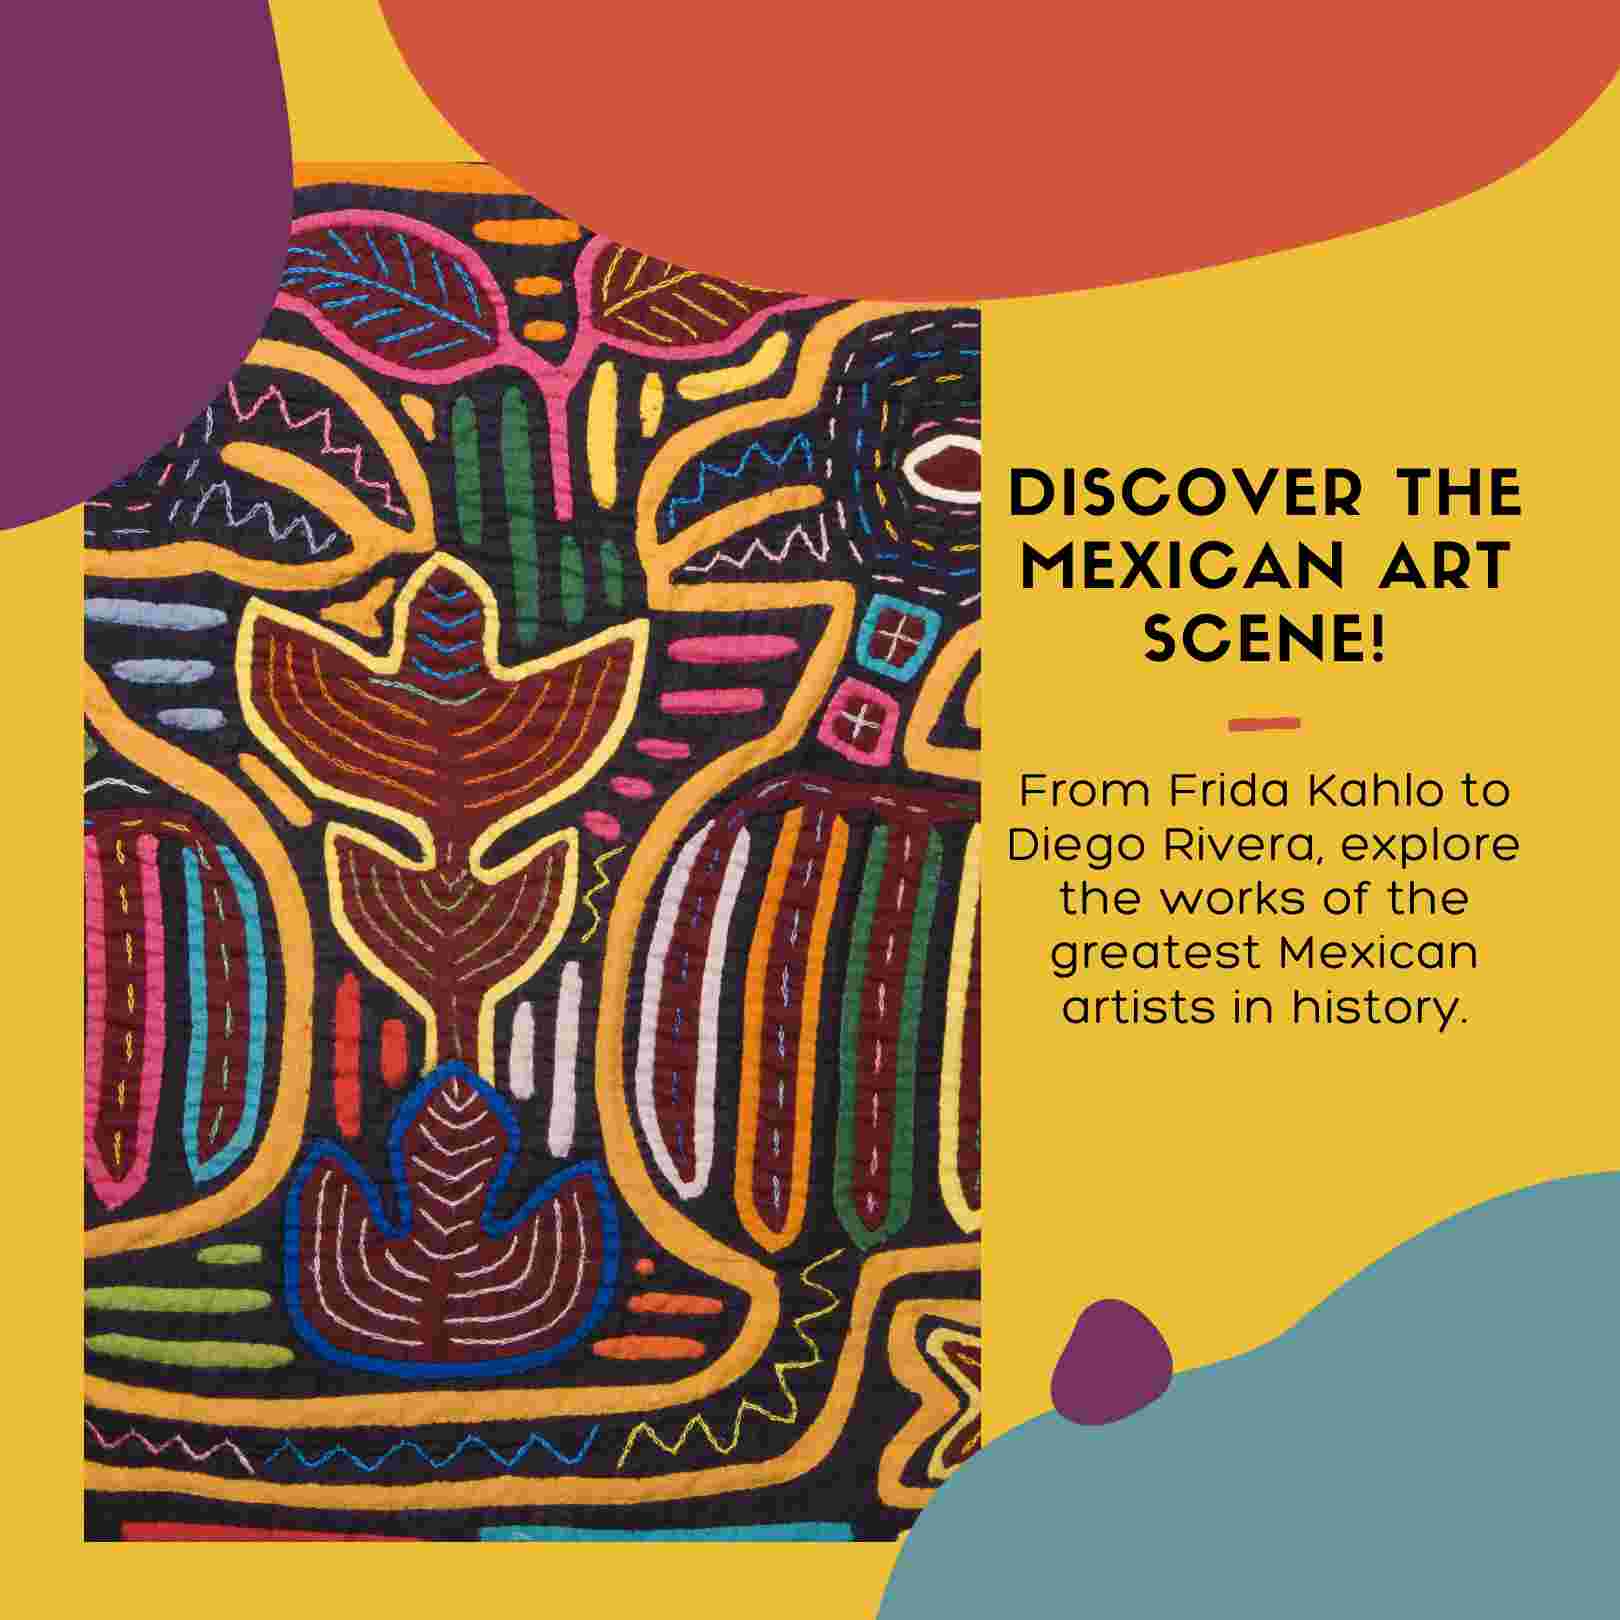 Mexican Art & Greatest Mexican Artists